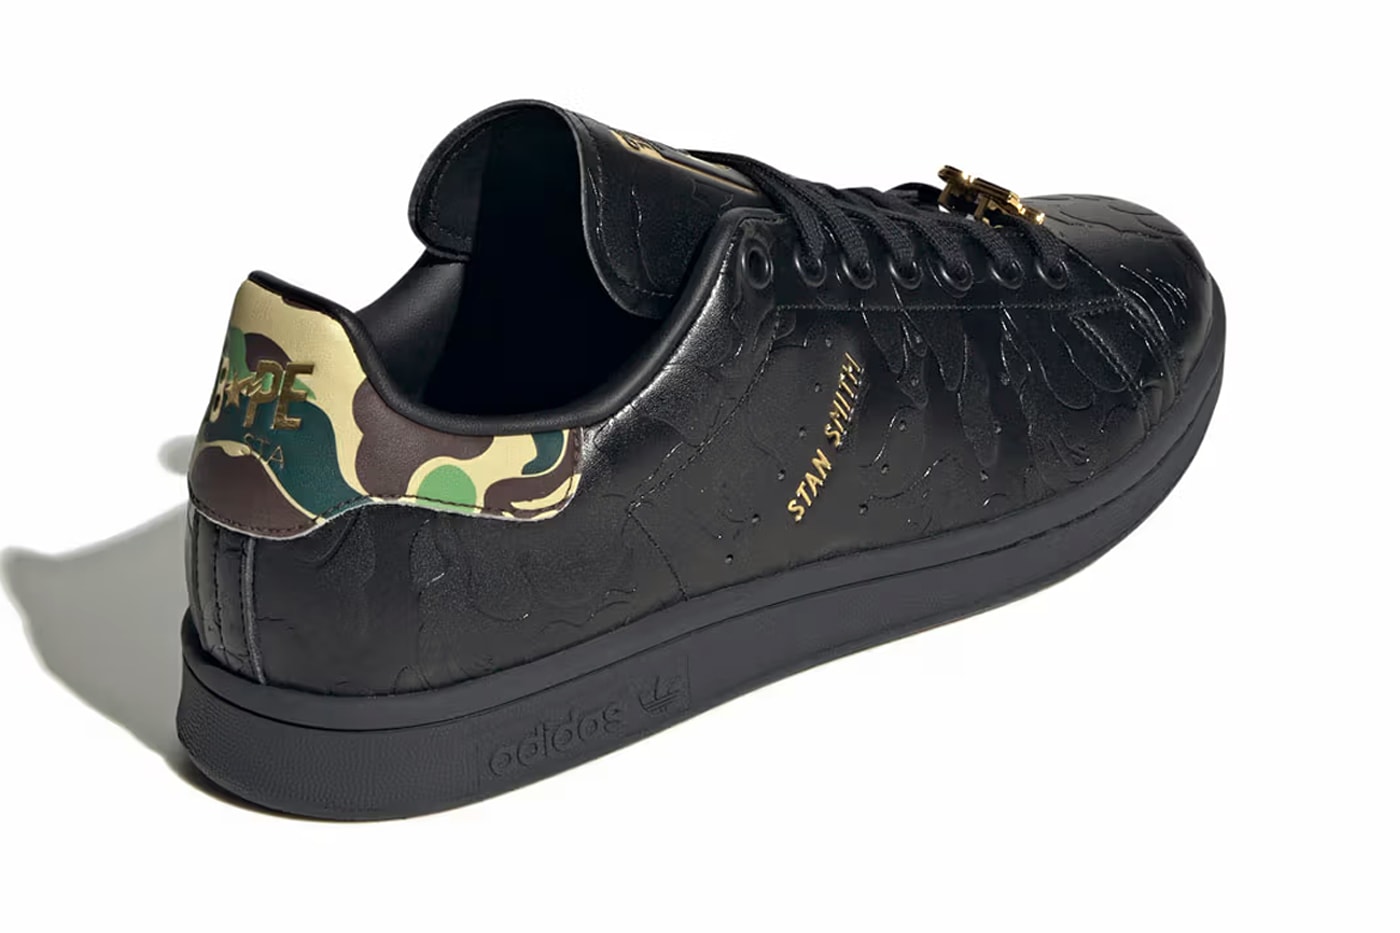 adidas and BAPE Reimagine the Stan Smith Footwear